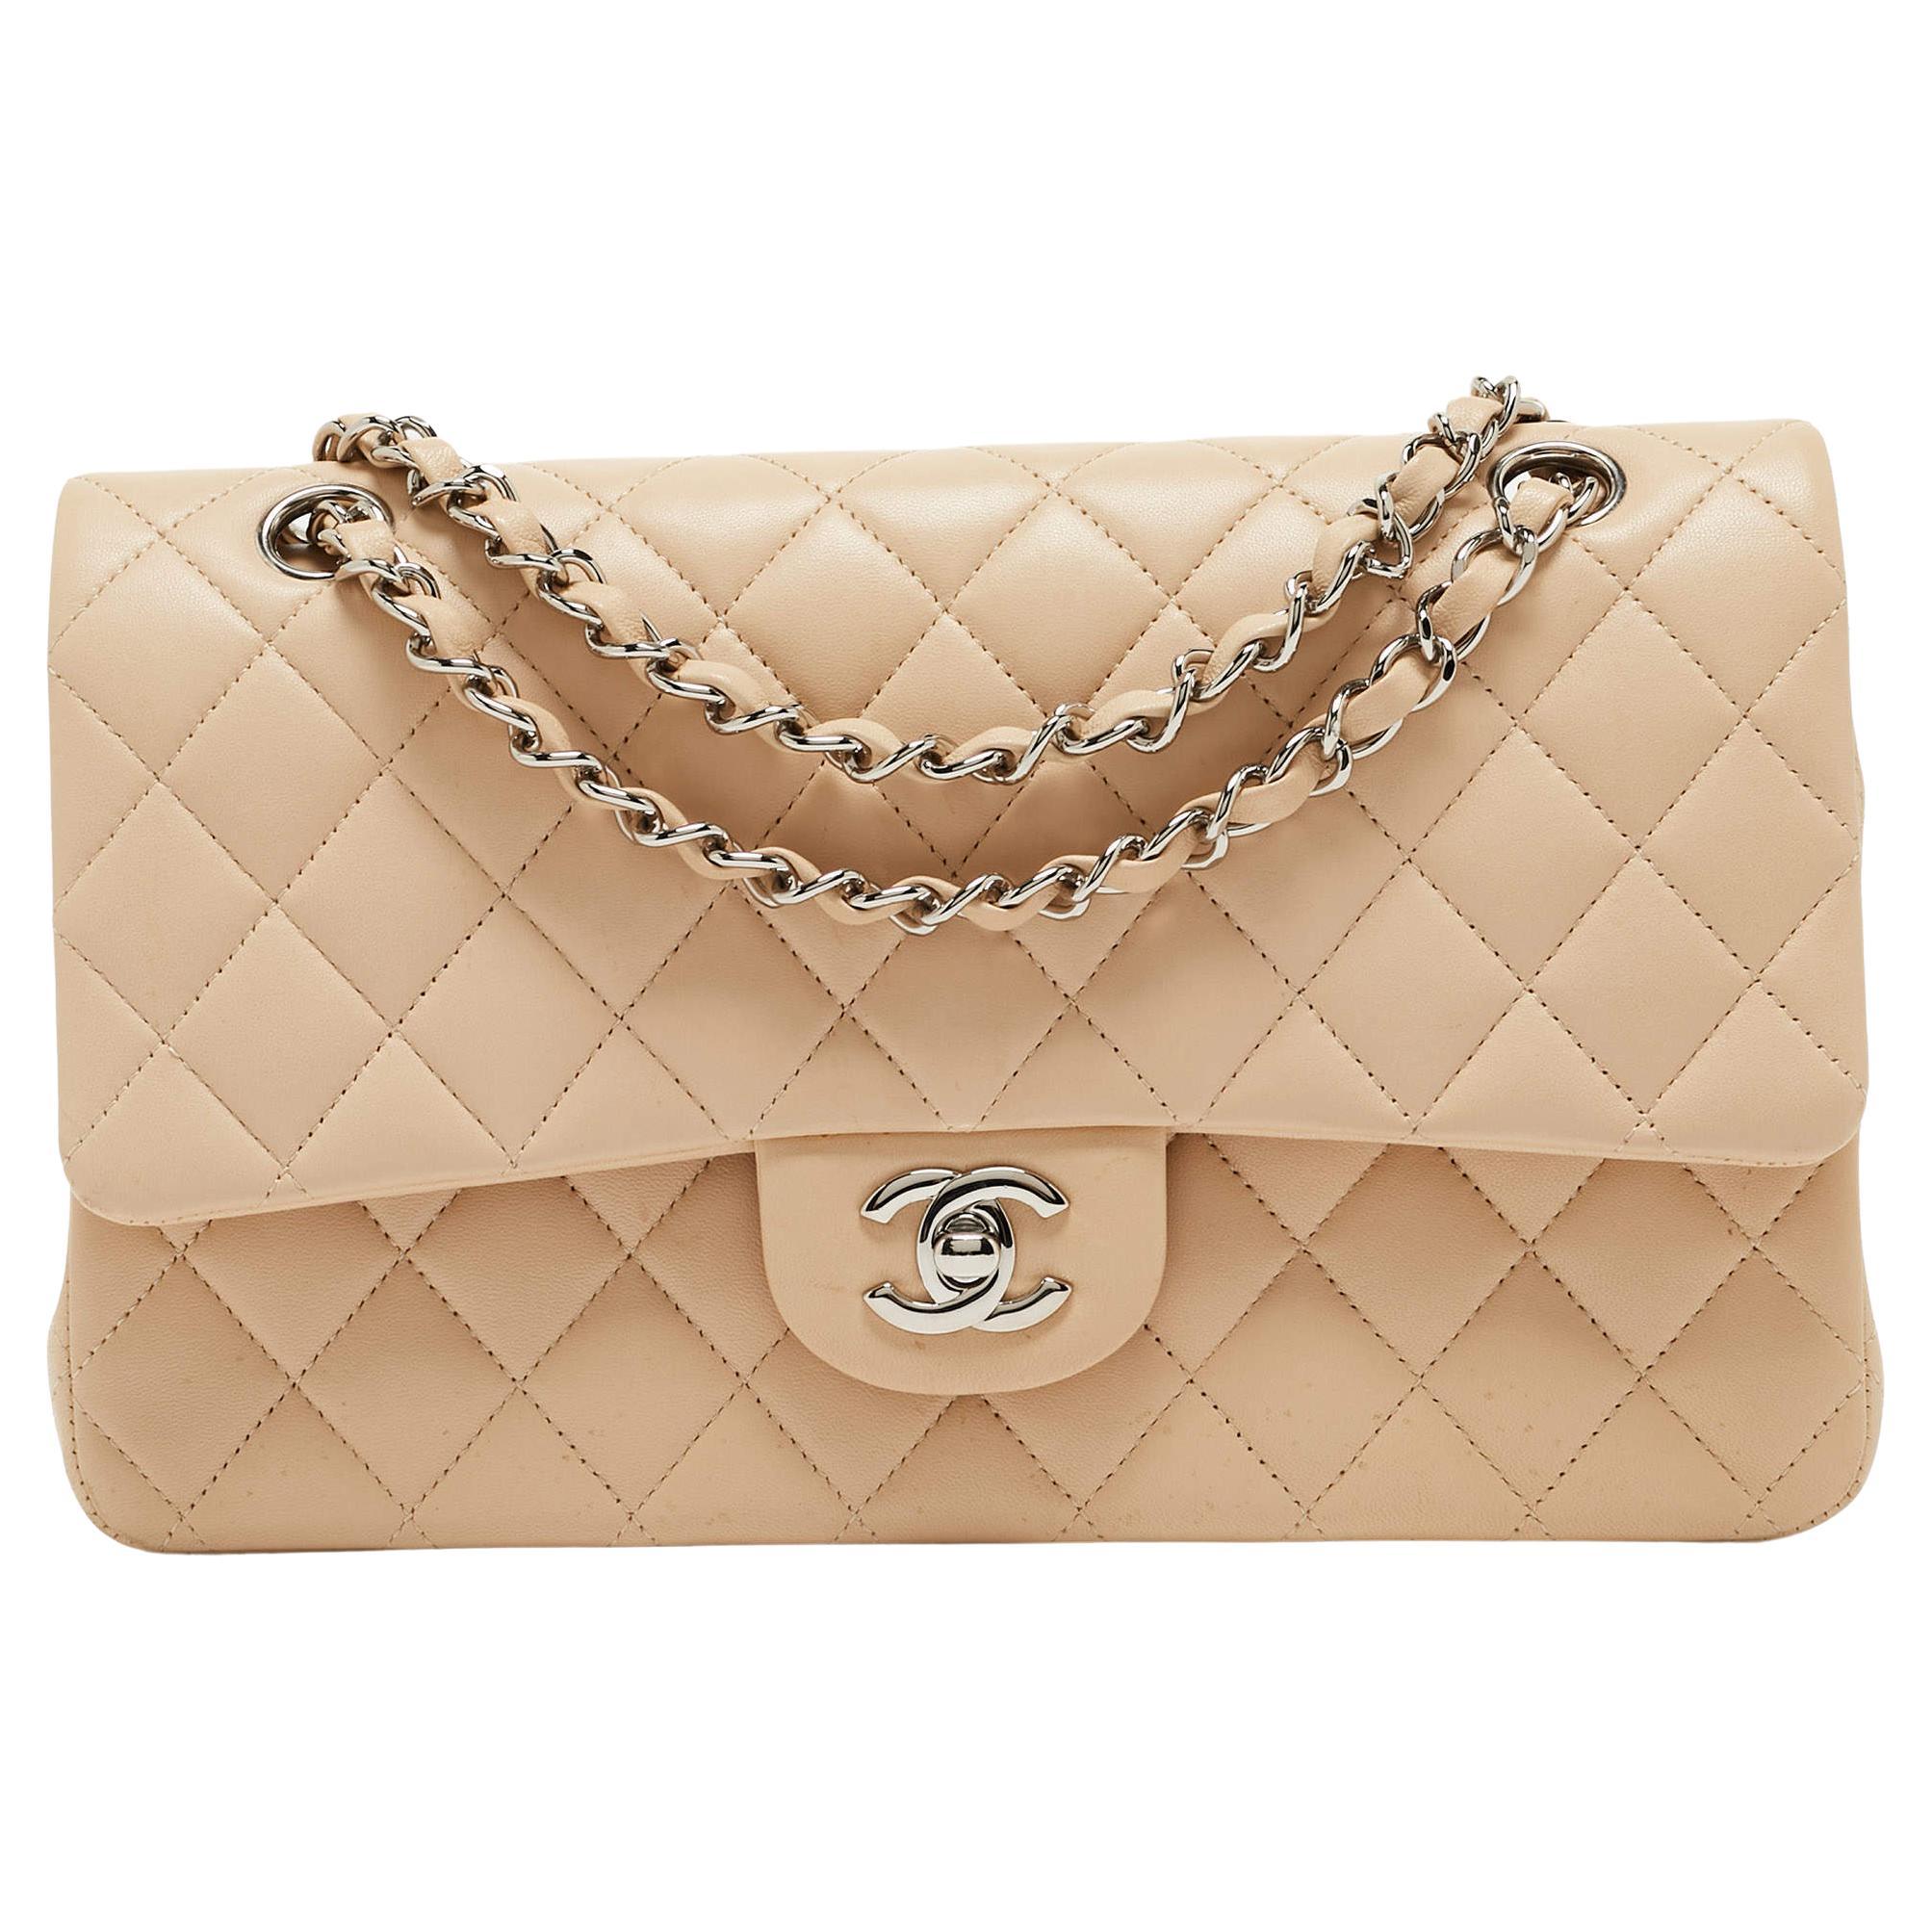 Chanel Beige Quilted Leather Medium Classic Double Flap Bag For Sale